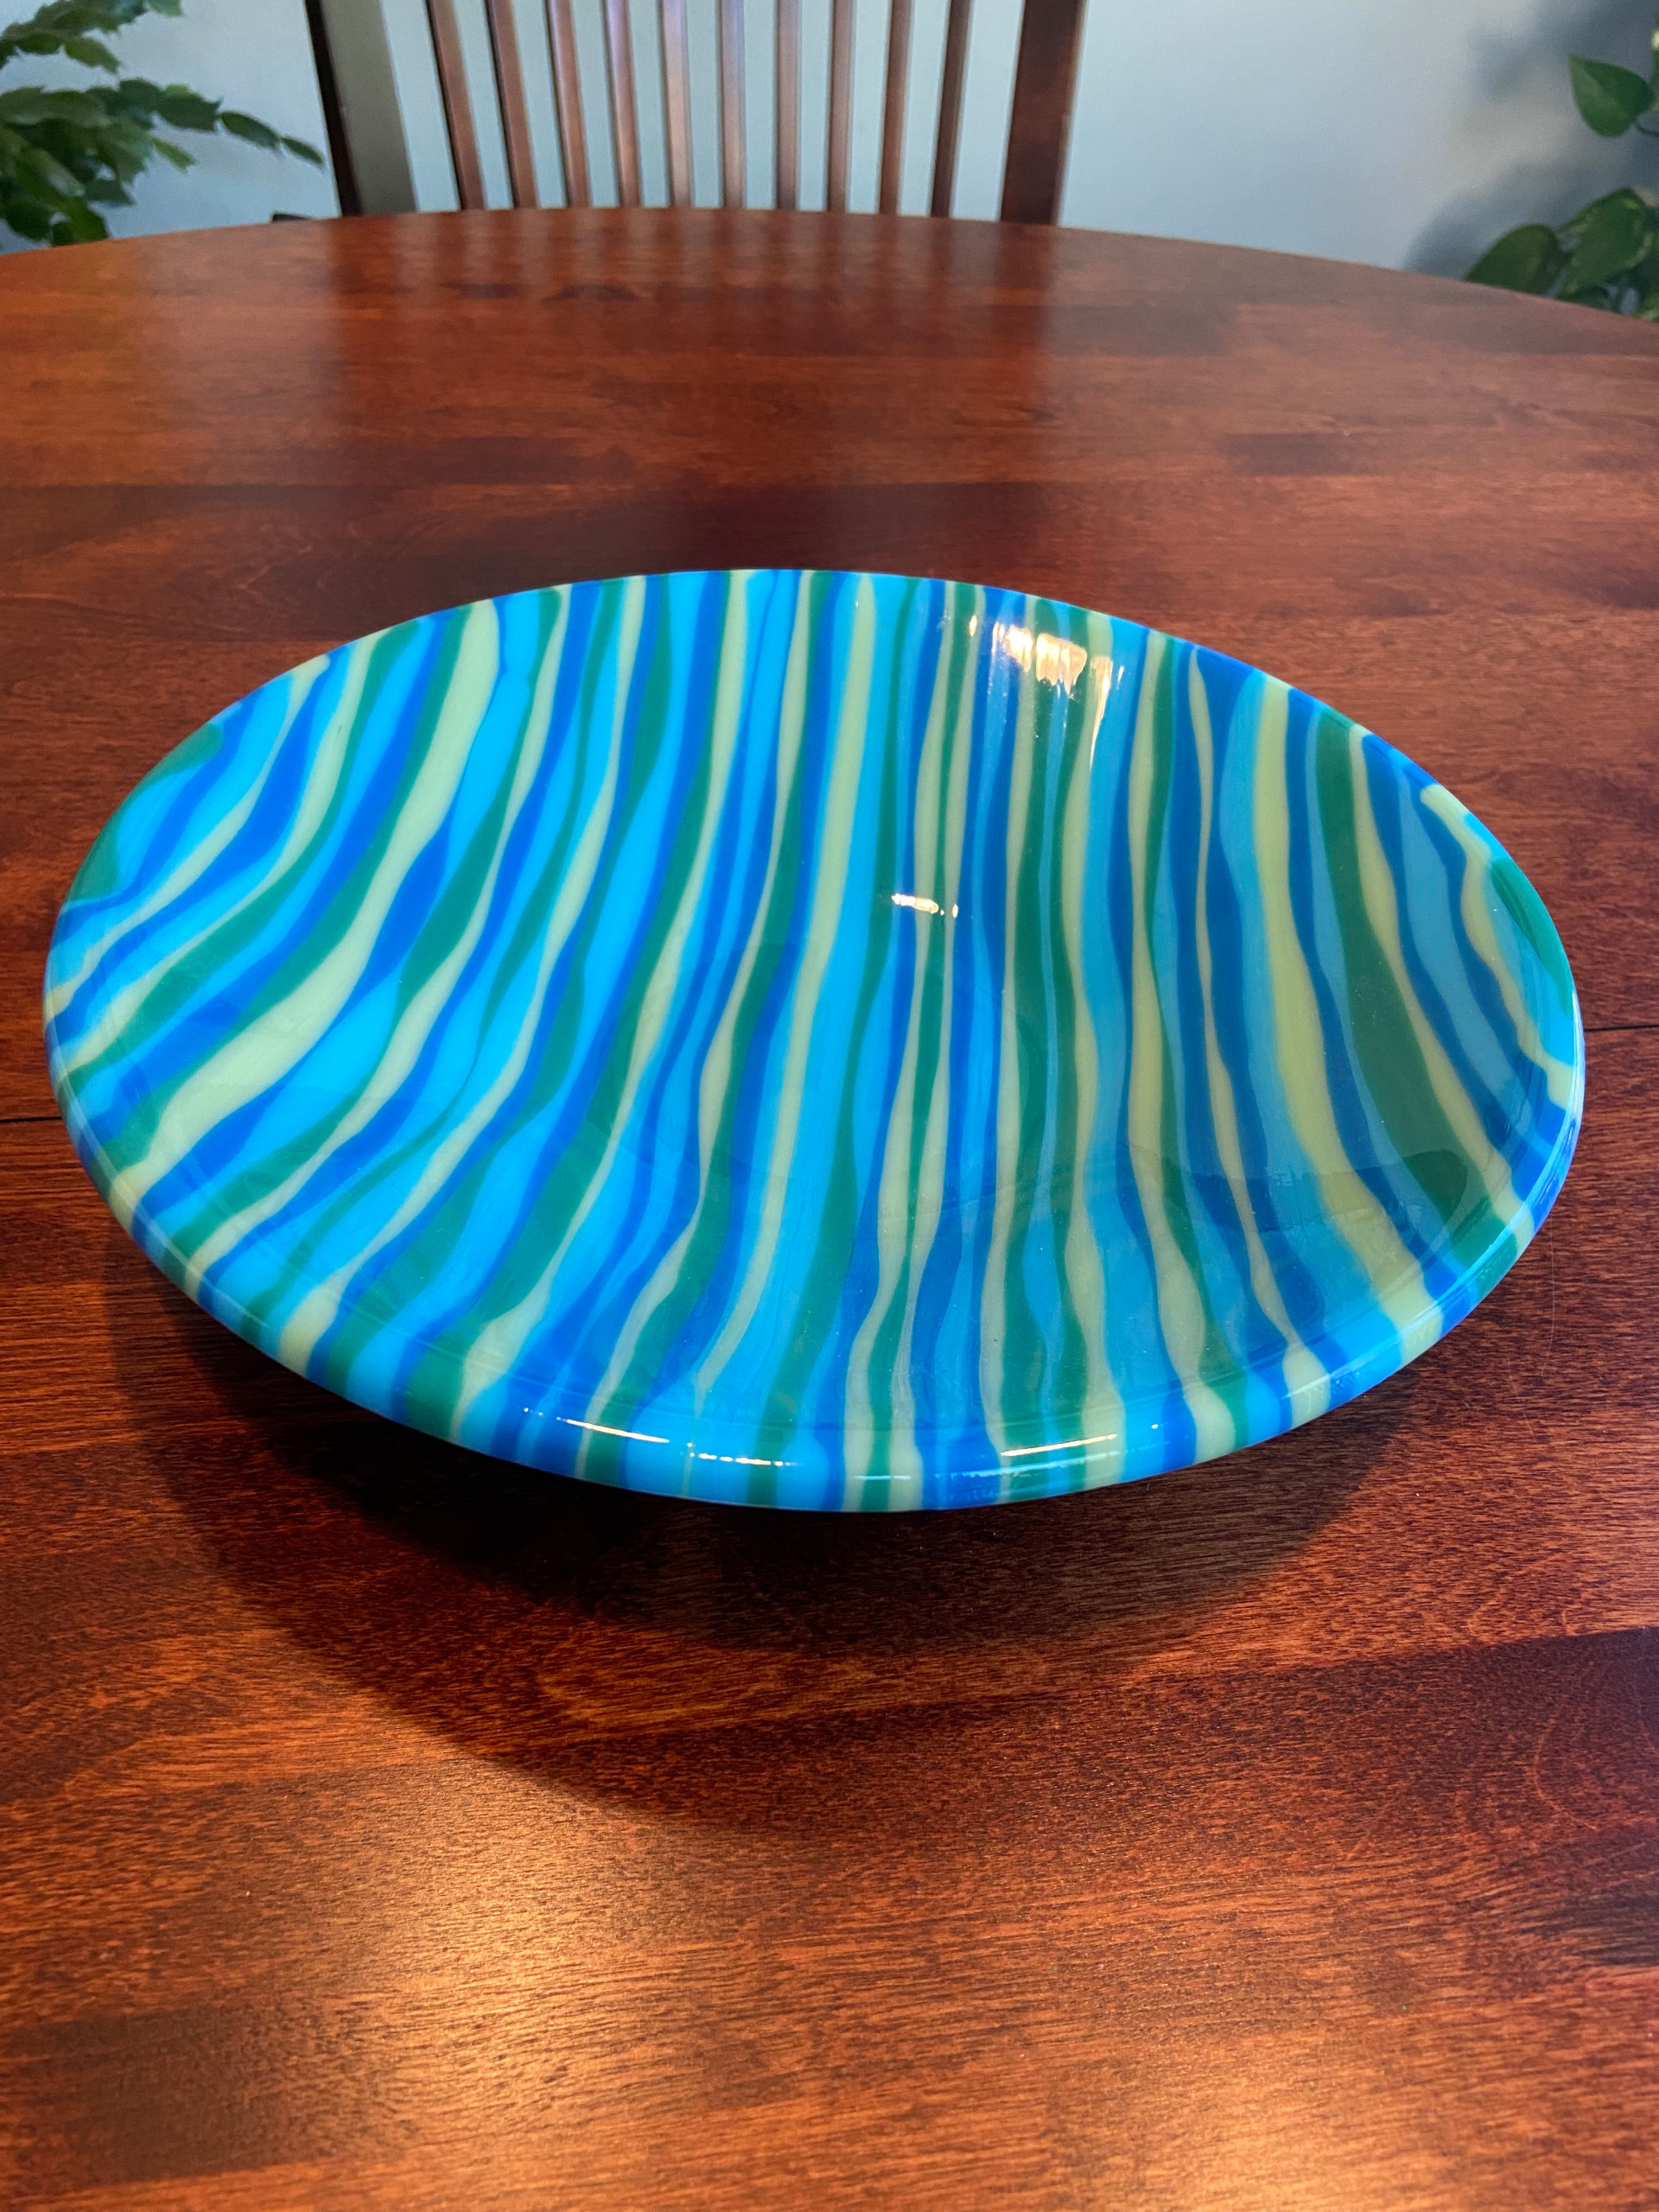 9" Blue/Turquoise/Green Serving Bowl - any combination of colors available